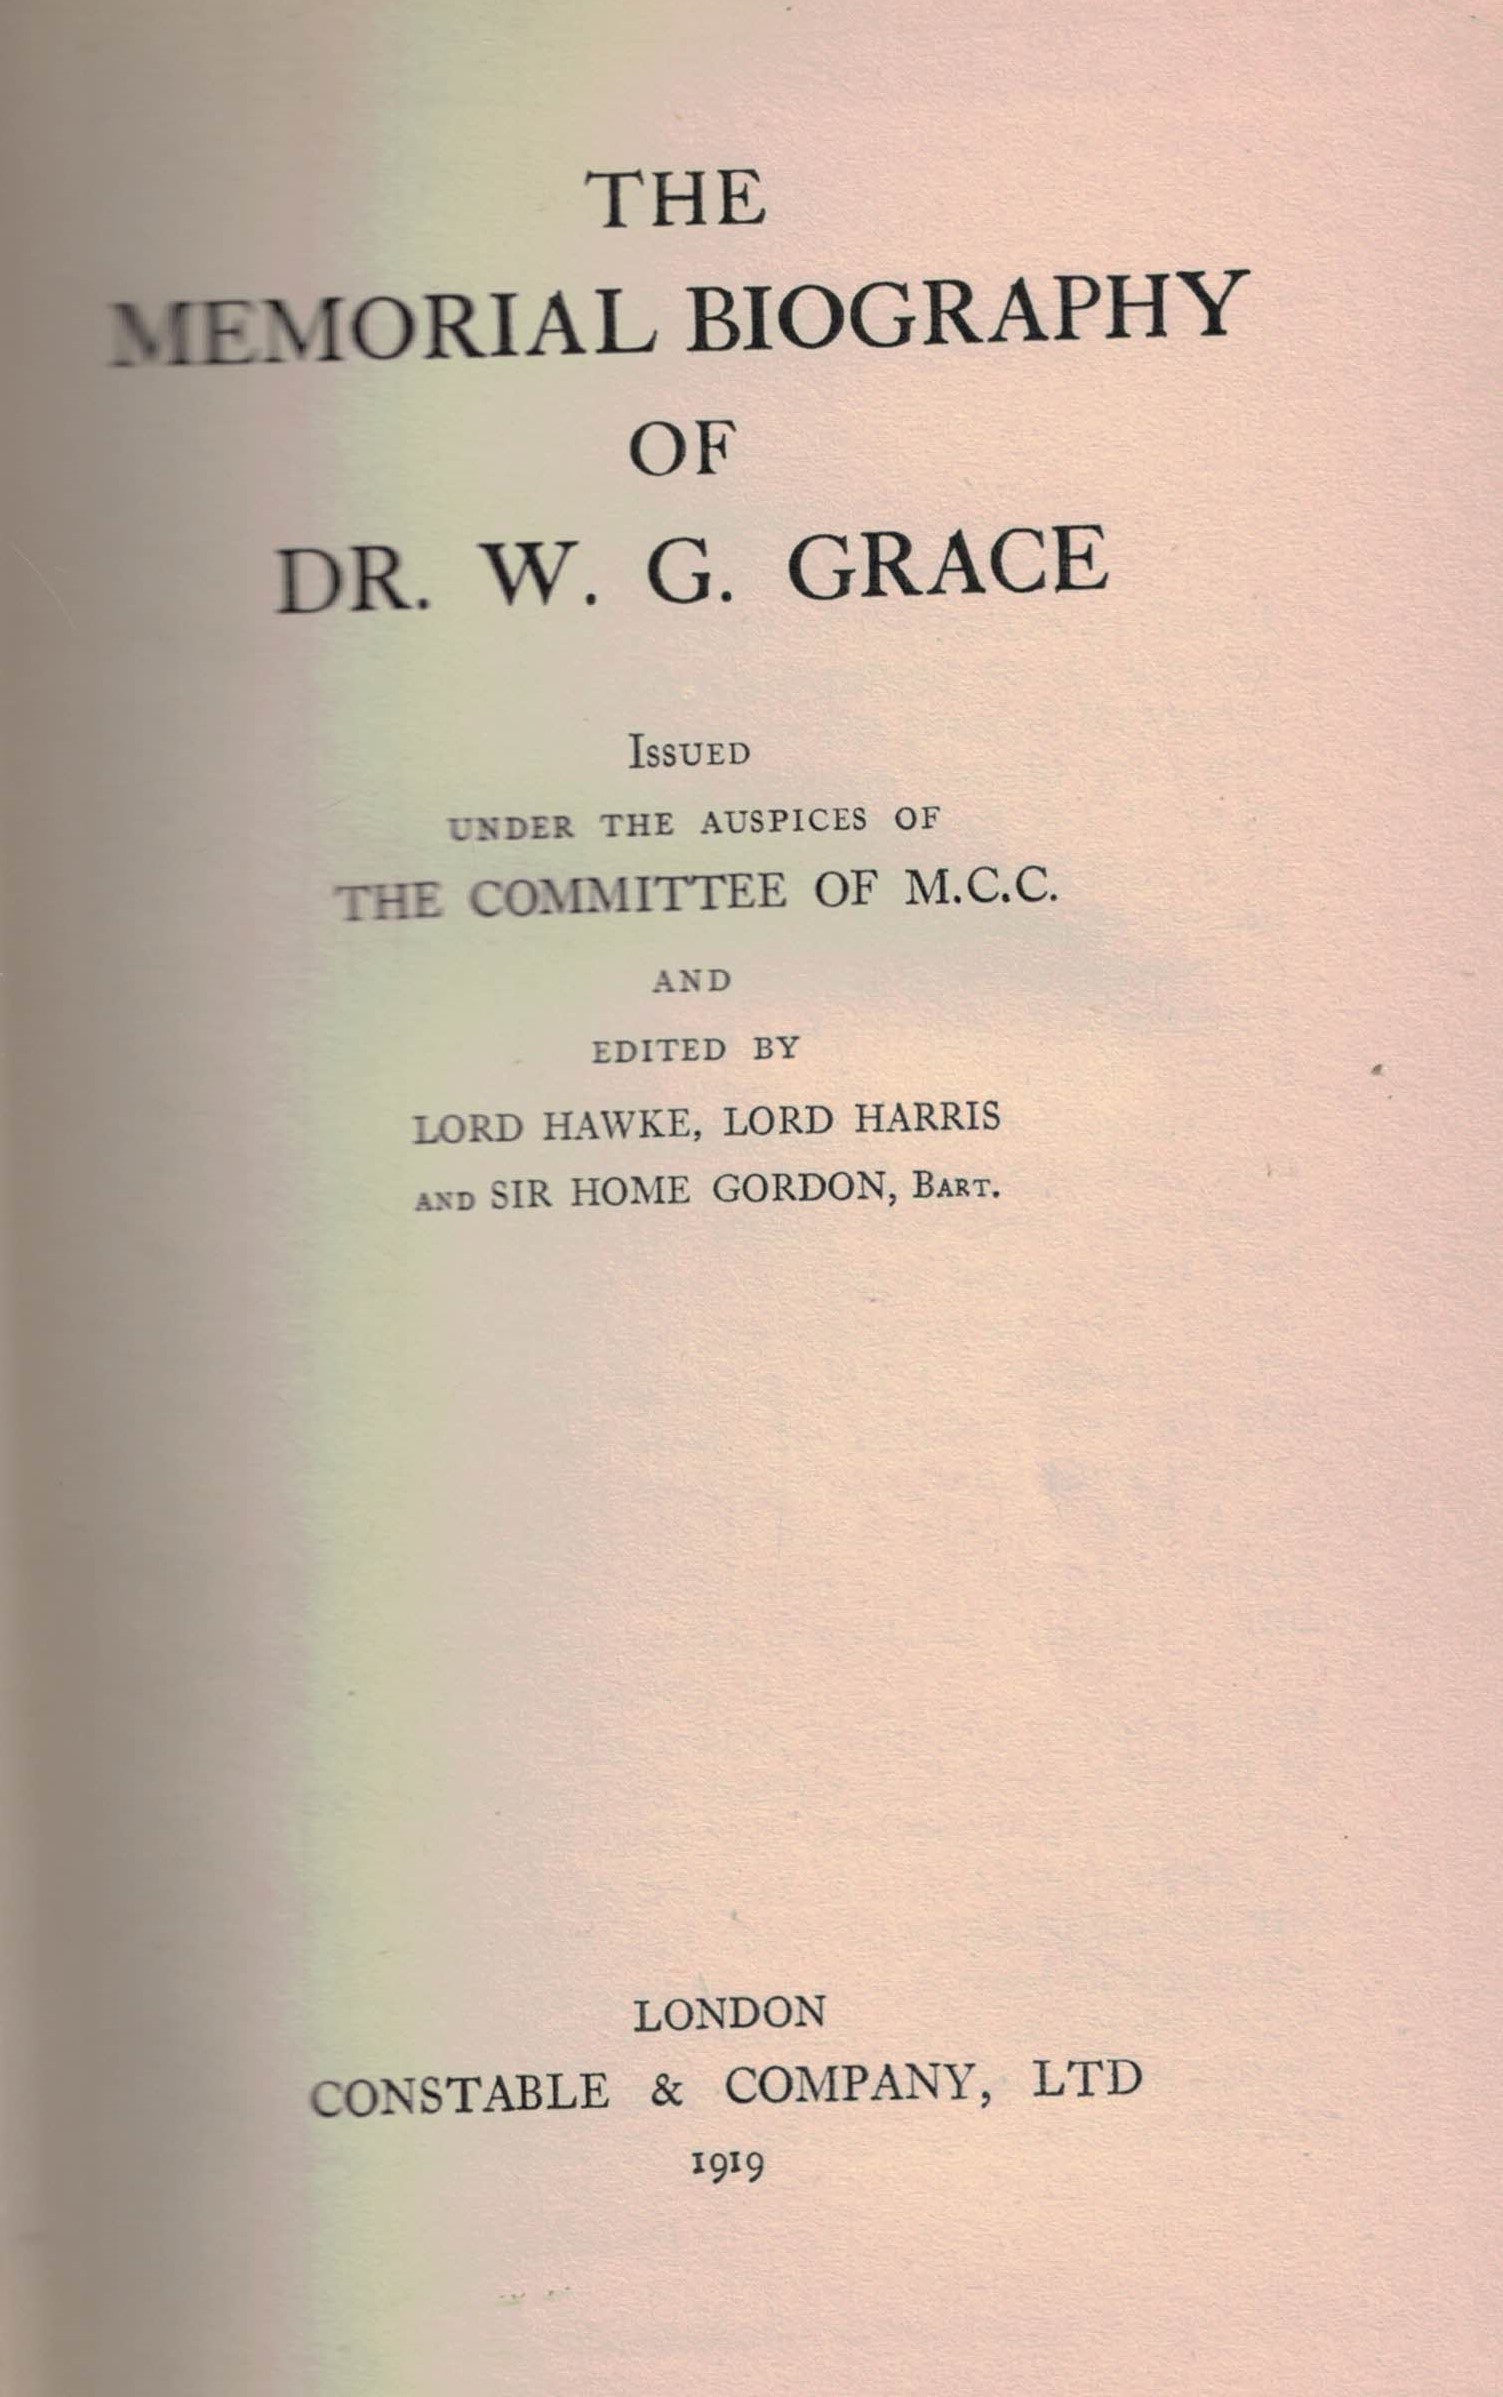 The Memorial Biography of Dr W G Grace